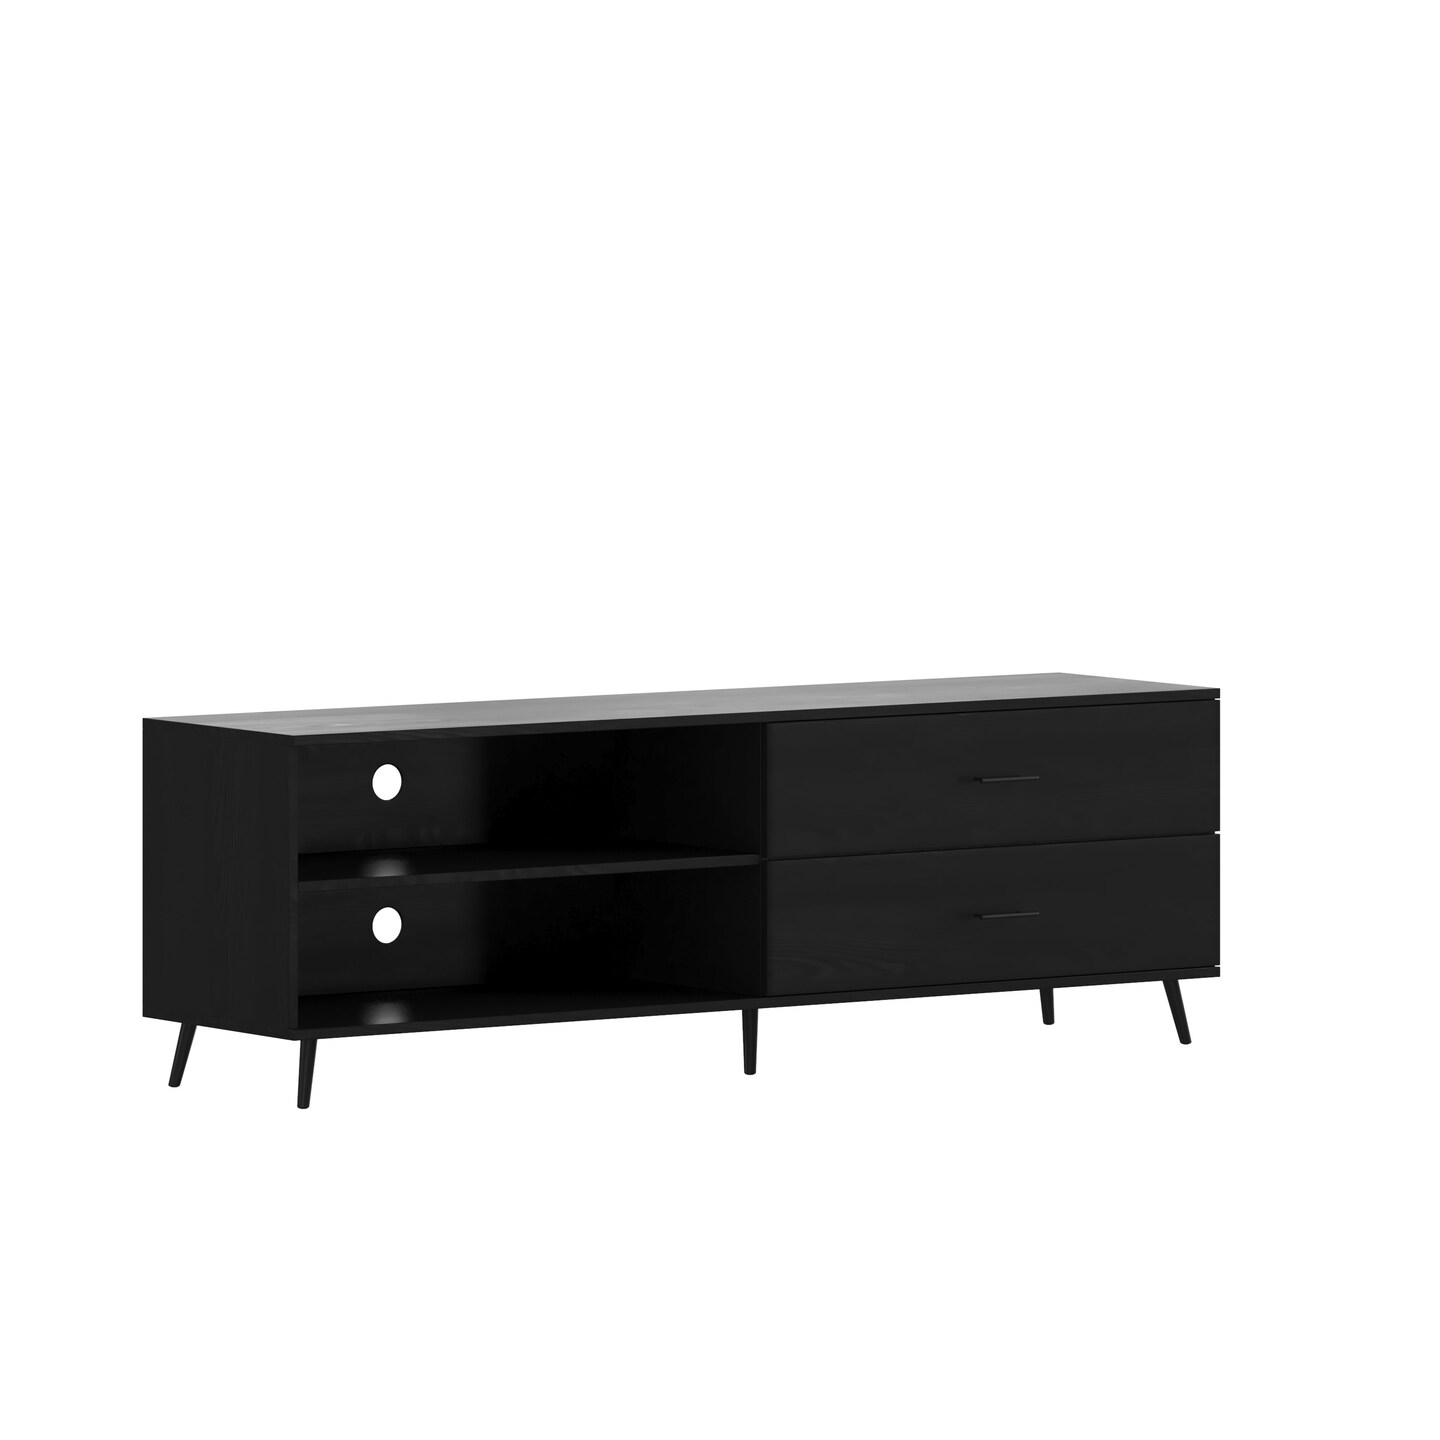 Merrick Lane Erikson Mid-Century Modern TV Stand with Adjustable Shelves and Two Drawers